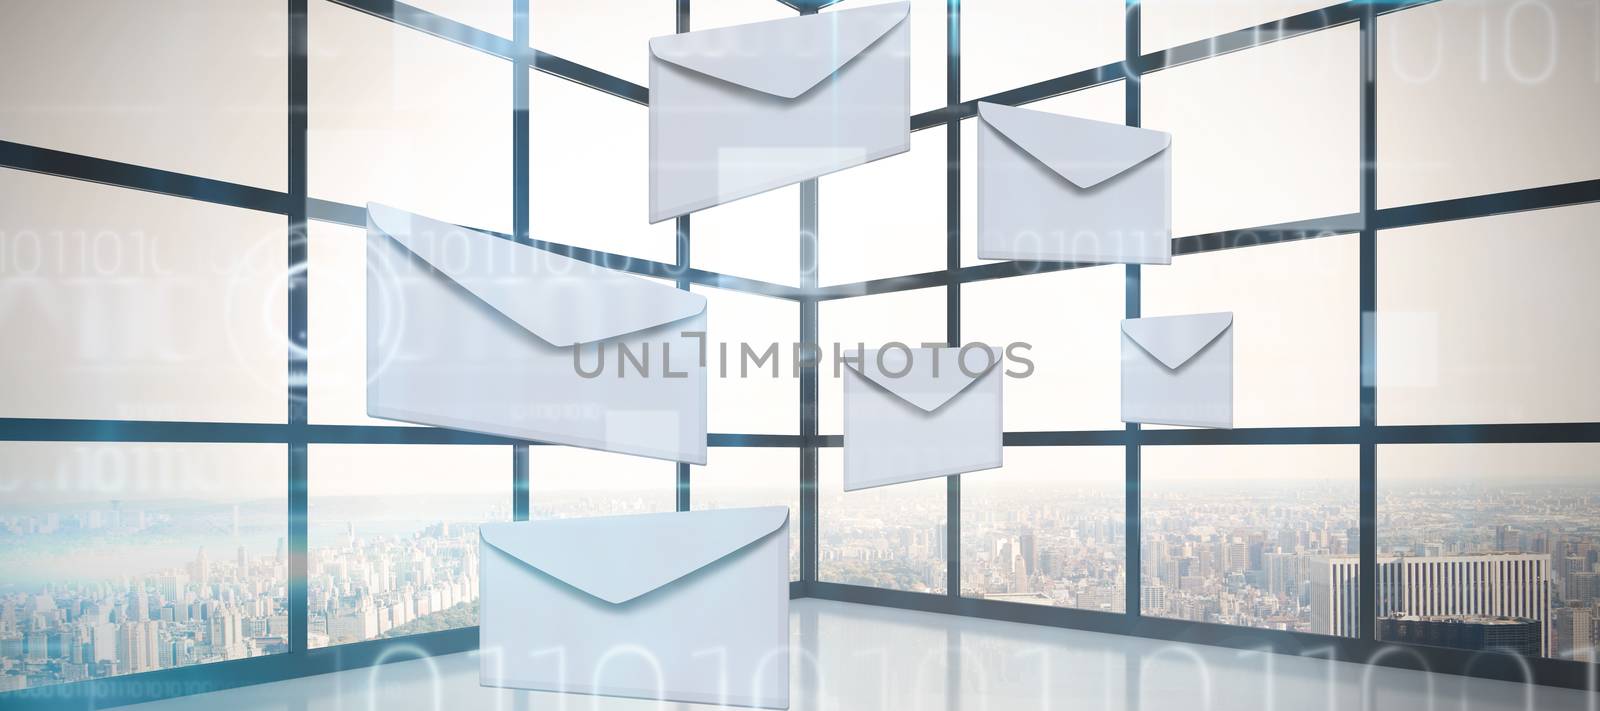 Graphic of Envelopes on white background against blue technology design with binary code